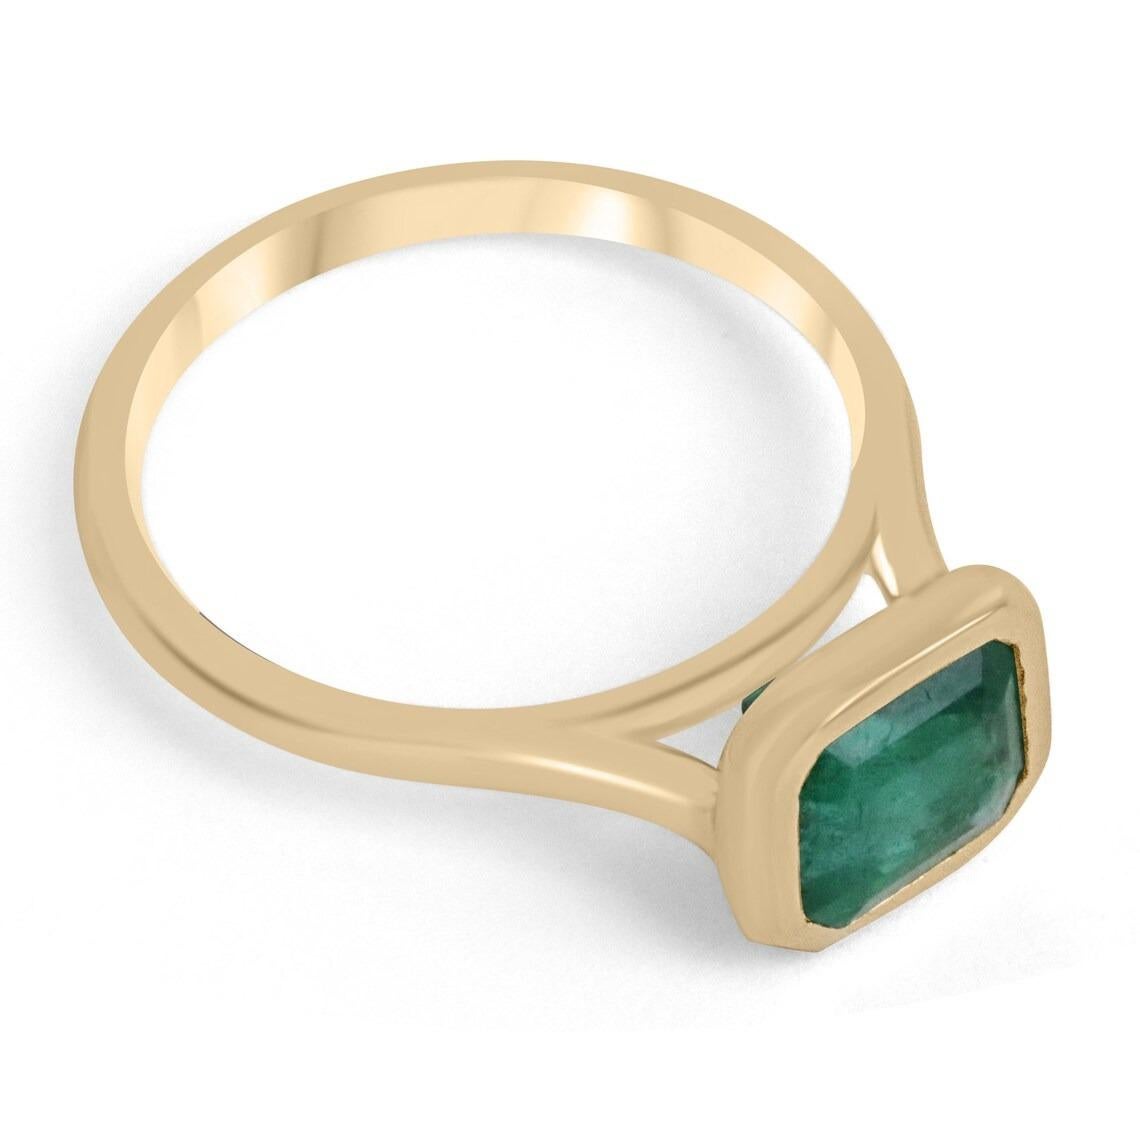 Displayed is a magnificent solitaire emerald engagement or right-hand ring. This lovely piece showcases an impressive 2.20-carat, natural emerald from the origin of Zambia. This mesmerizing stone has the most beautiful and desirable dark forest